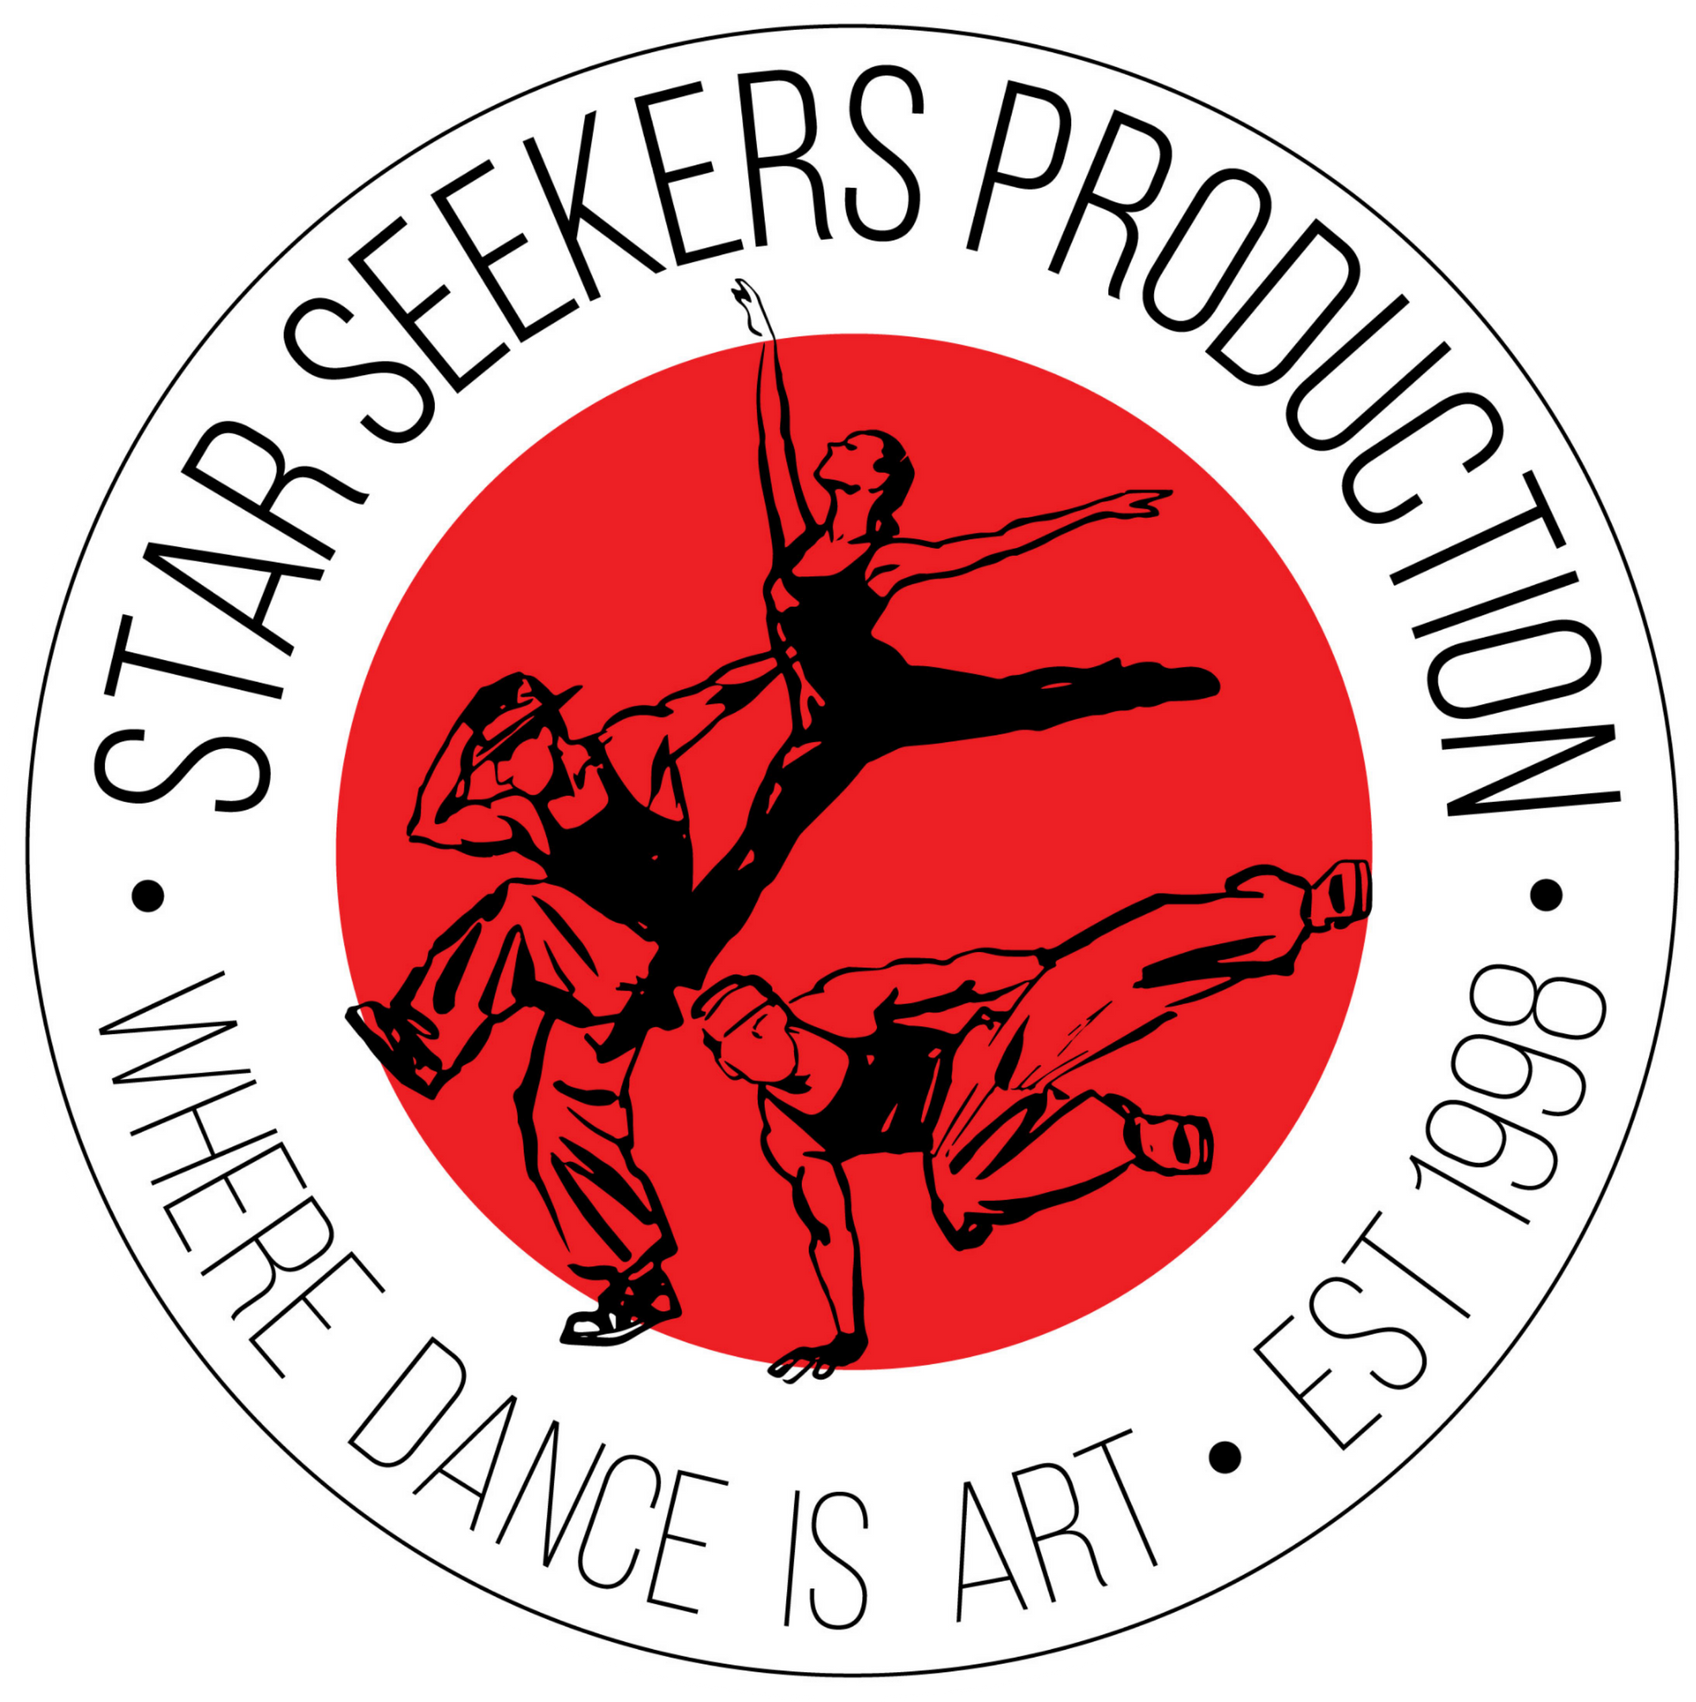 Star Seekers Production logo